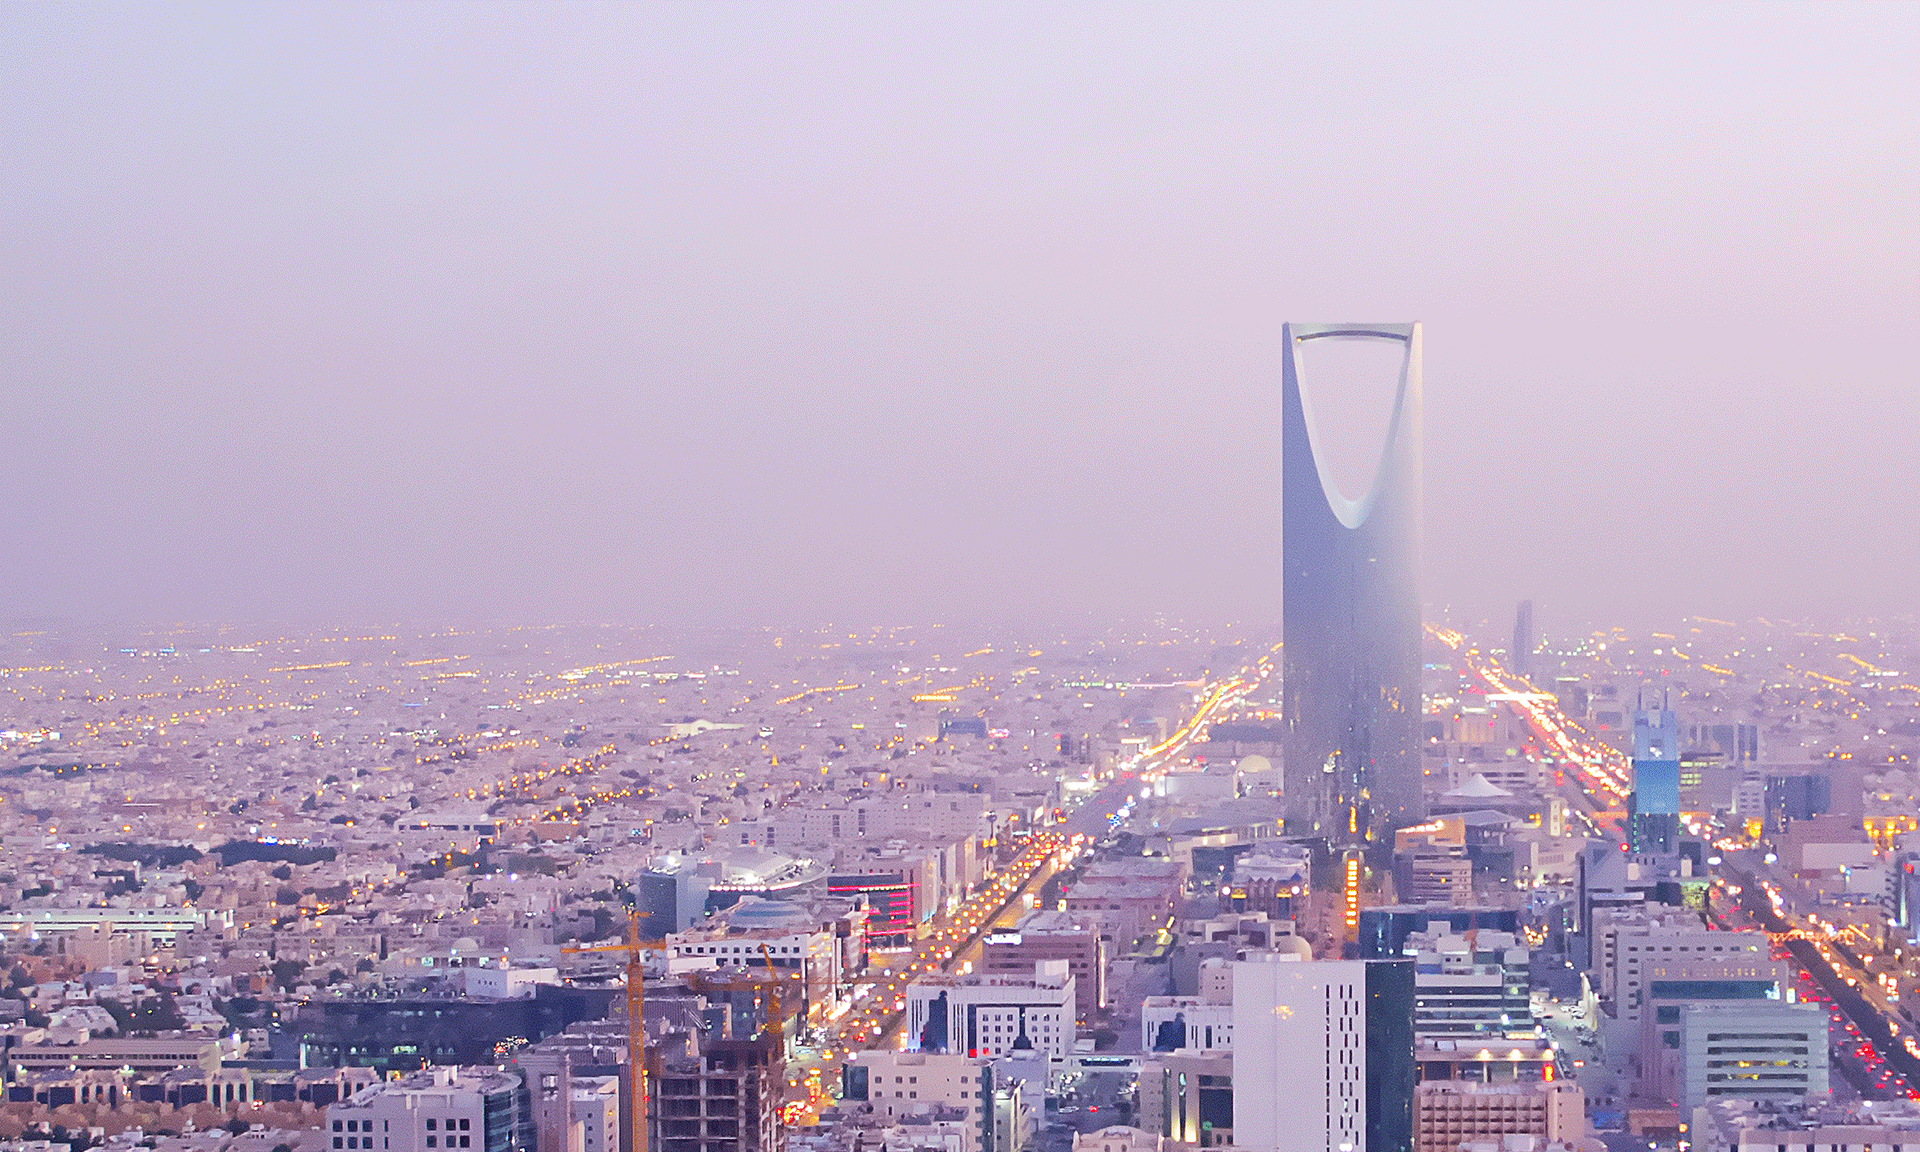 USD 3 Trillion of Investment Target into The Kingdom Over Nine Years: Saudi Investment Minister Says